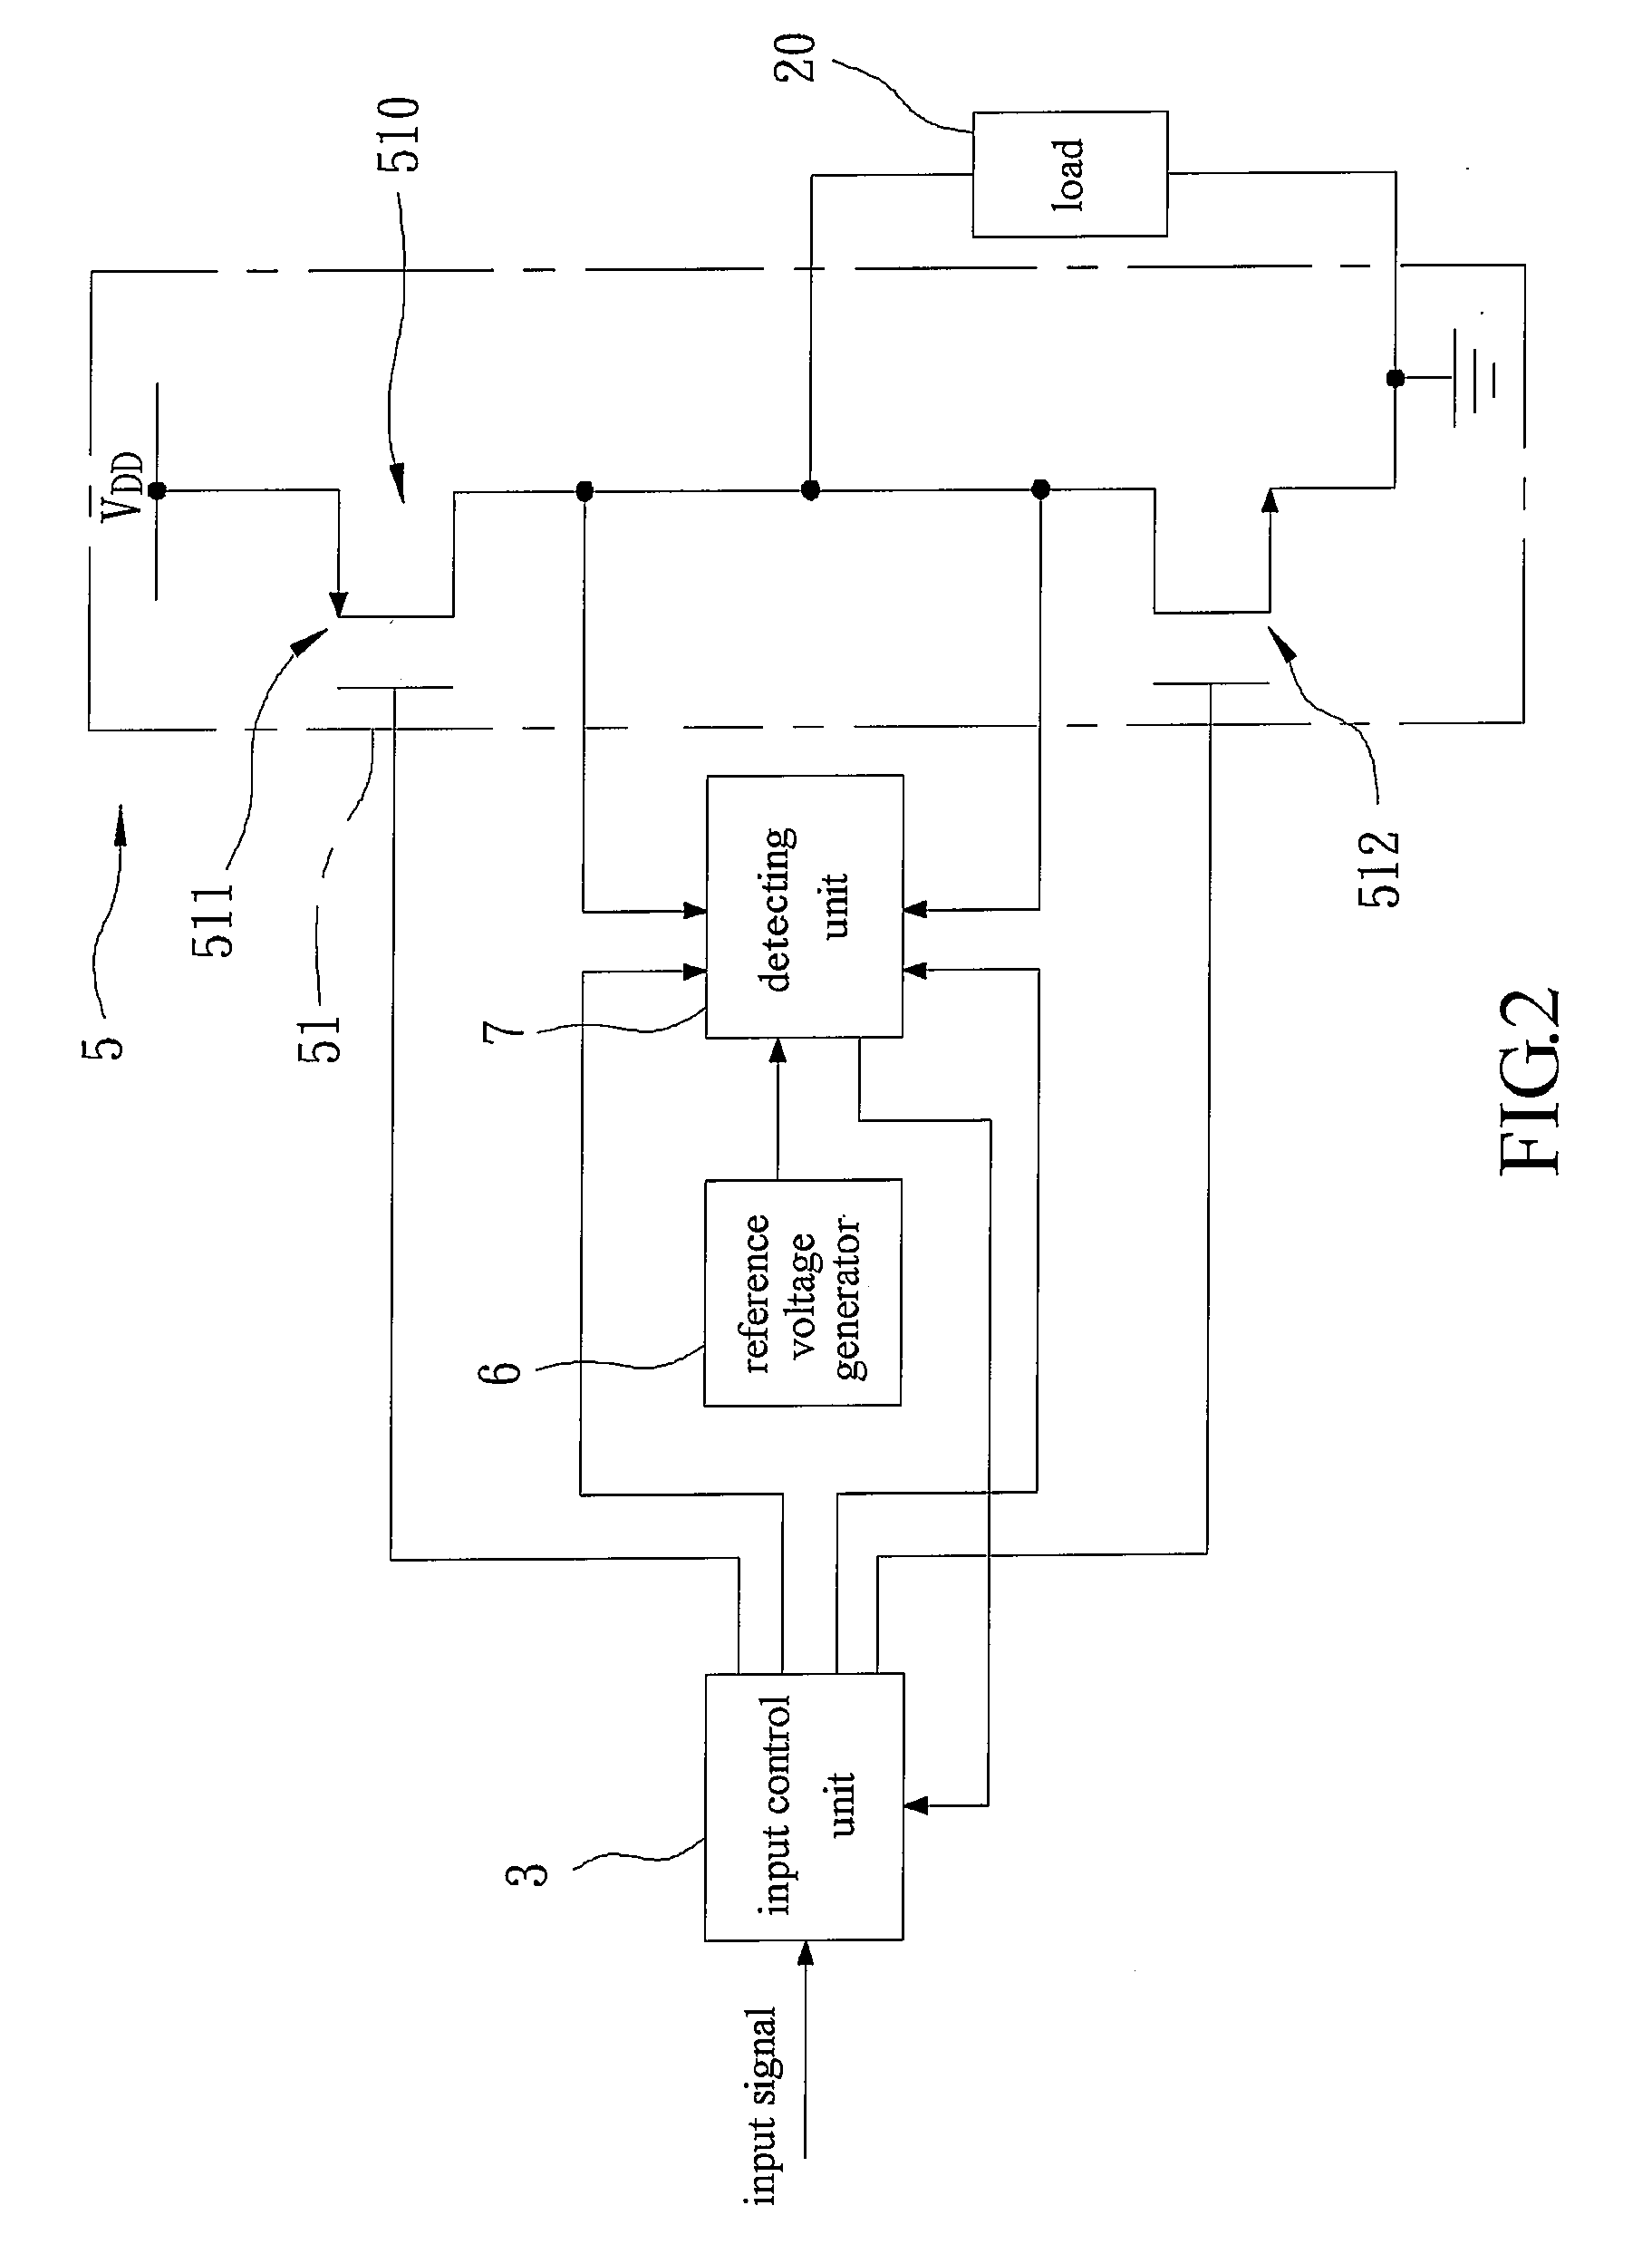 Power output device with protection function for short circuit and overload